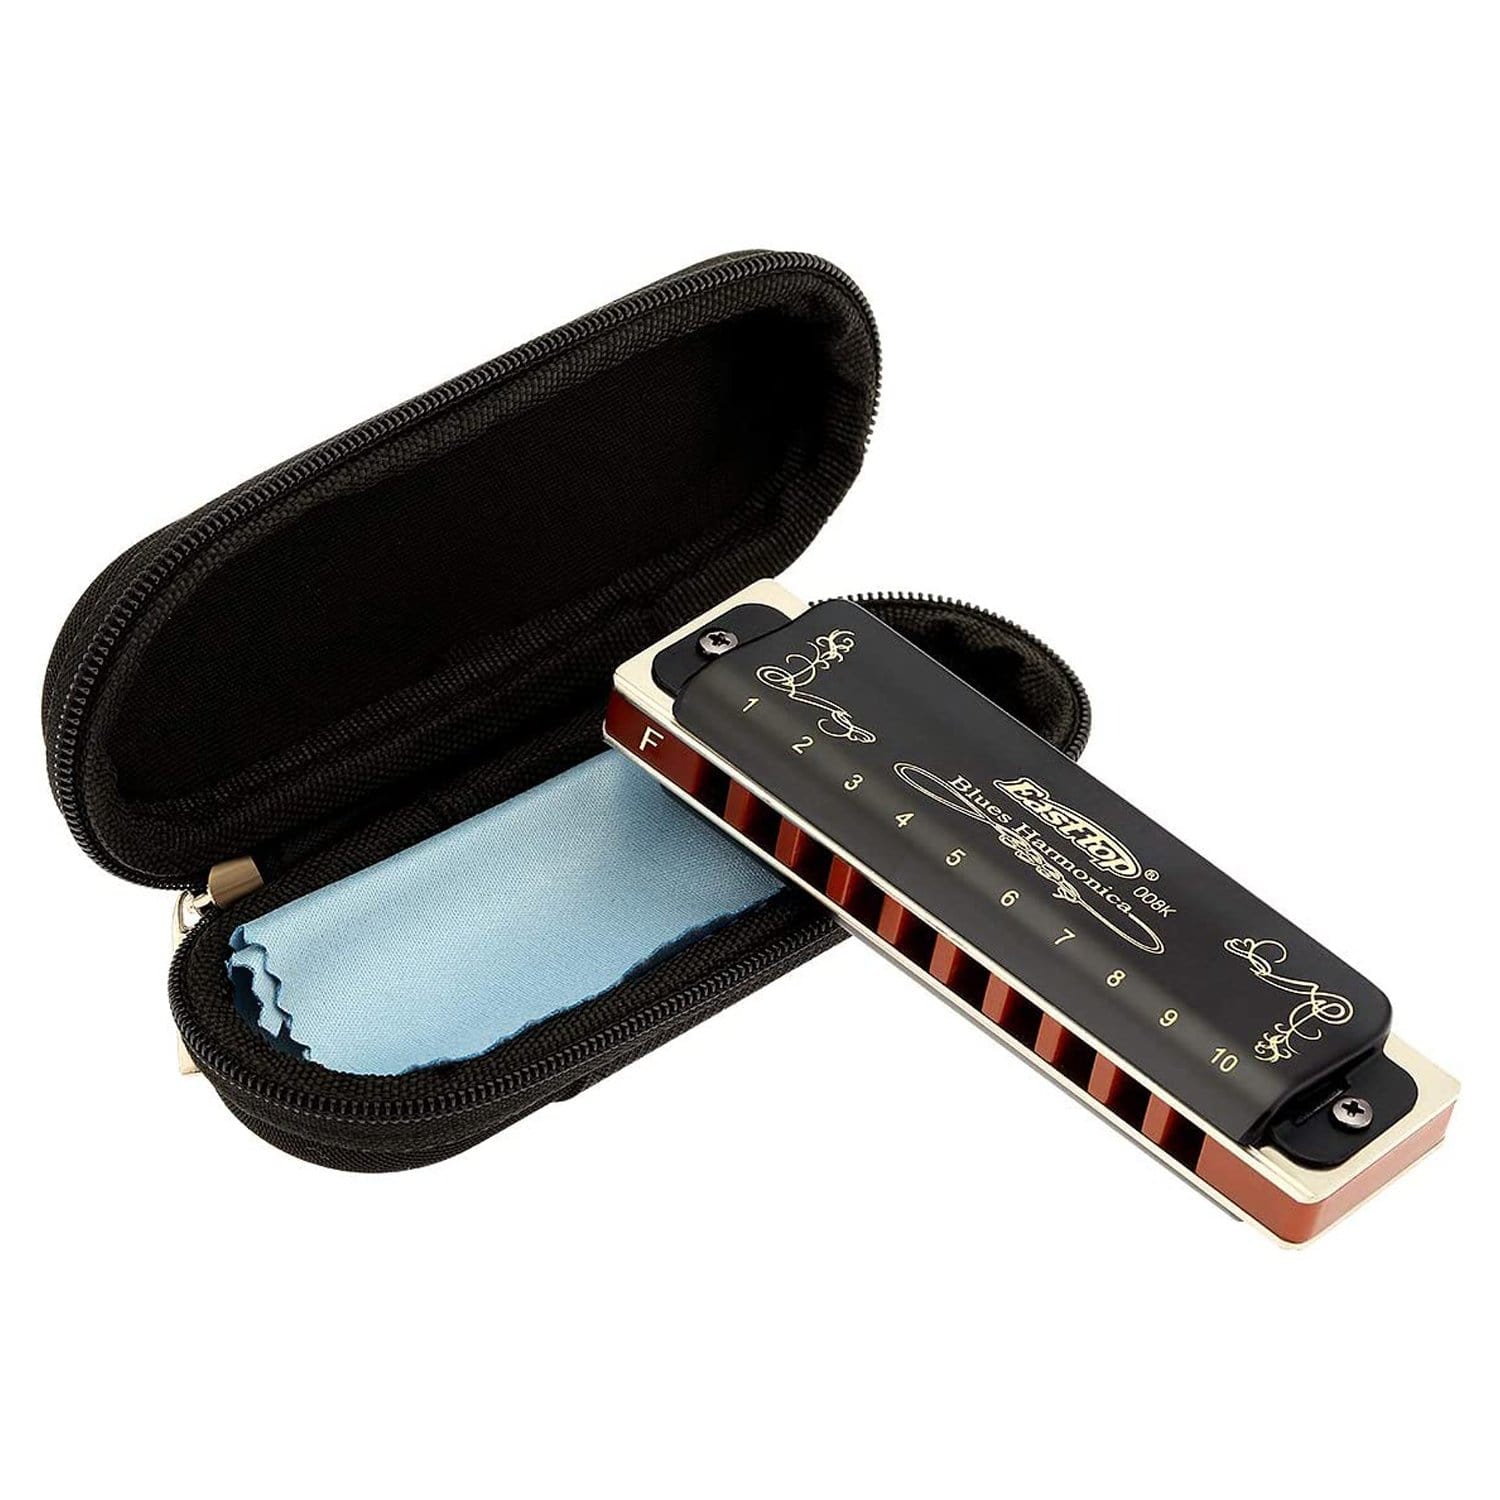 East top 10 Holes 20 Tones 008K Diatonic Harmonica  with Blue/Black/Sliver Case, Major 12 keys available,Standard Harmonicas For Adults, Professional Player, Beginner and Students（T008K-BL/BK/SR） - Easttop harmonica